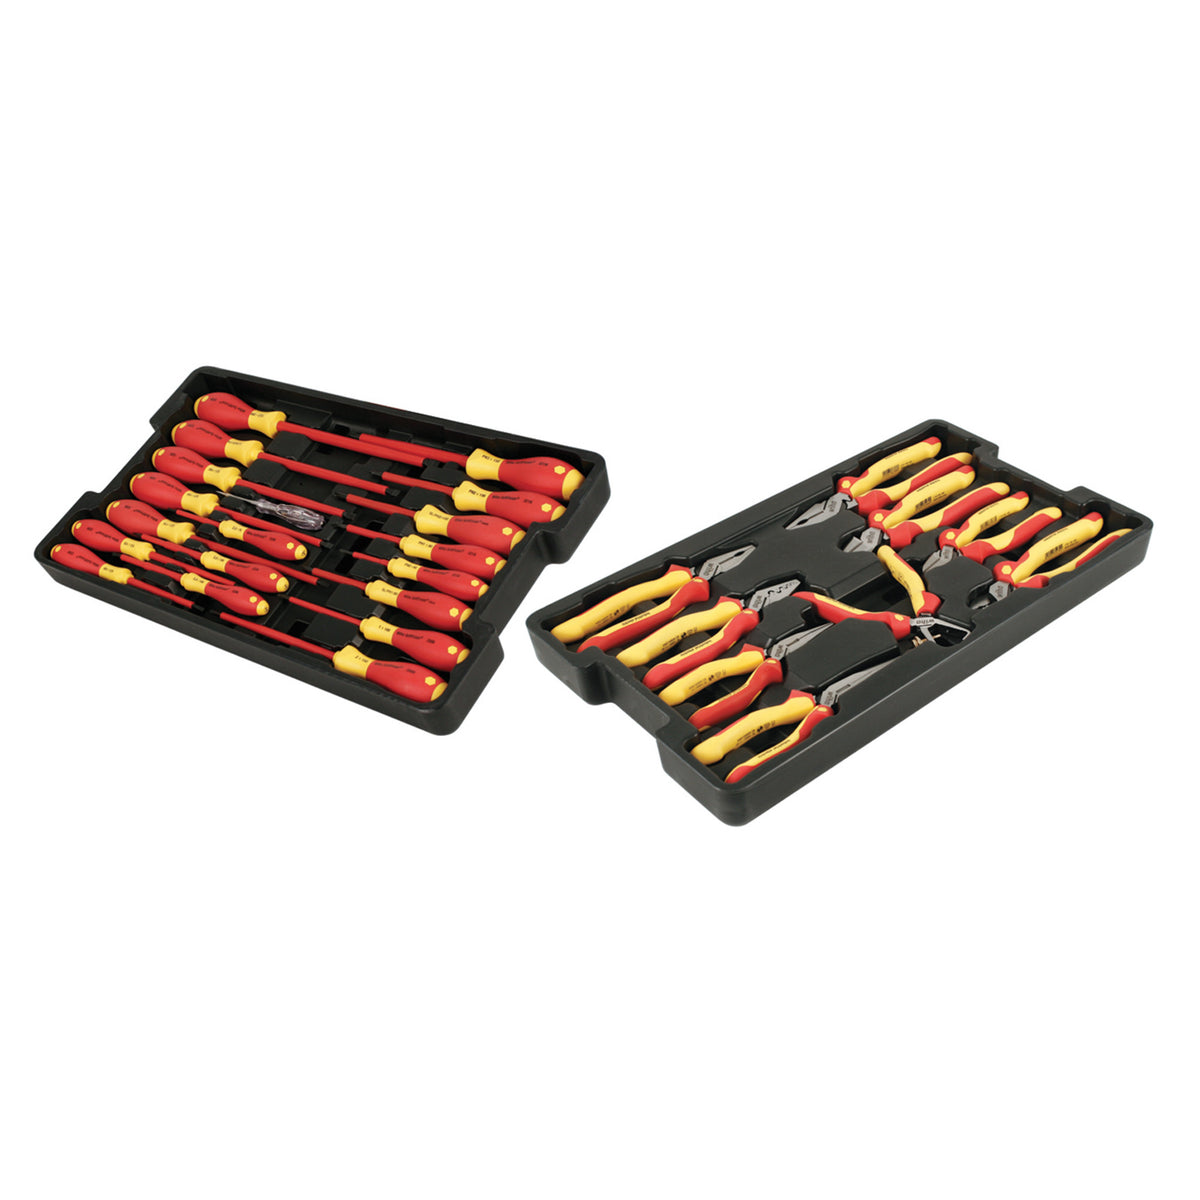 Wiha 32989 28 Piece Insulated Pliers-Cutters and Screwdriver Set